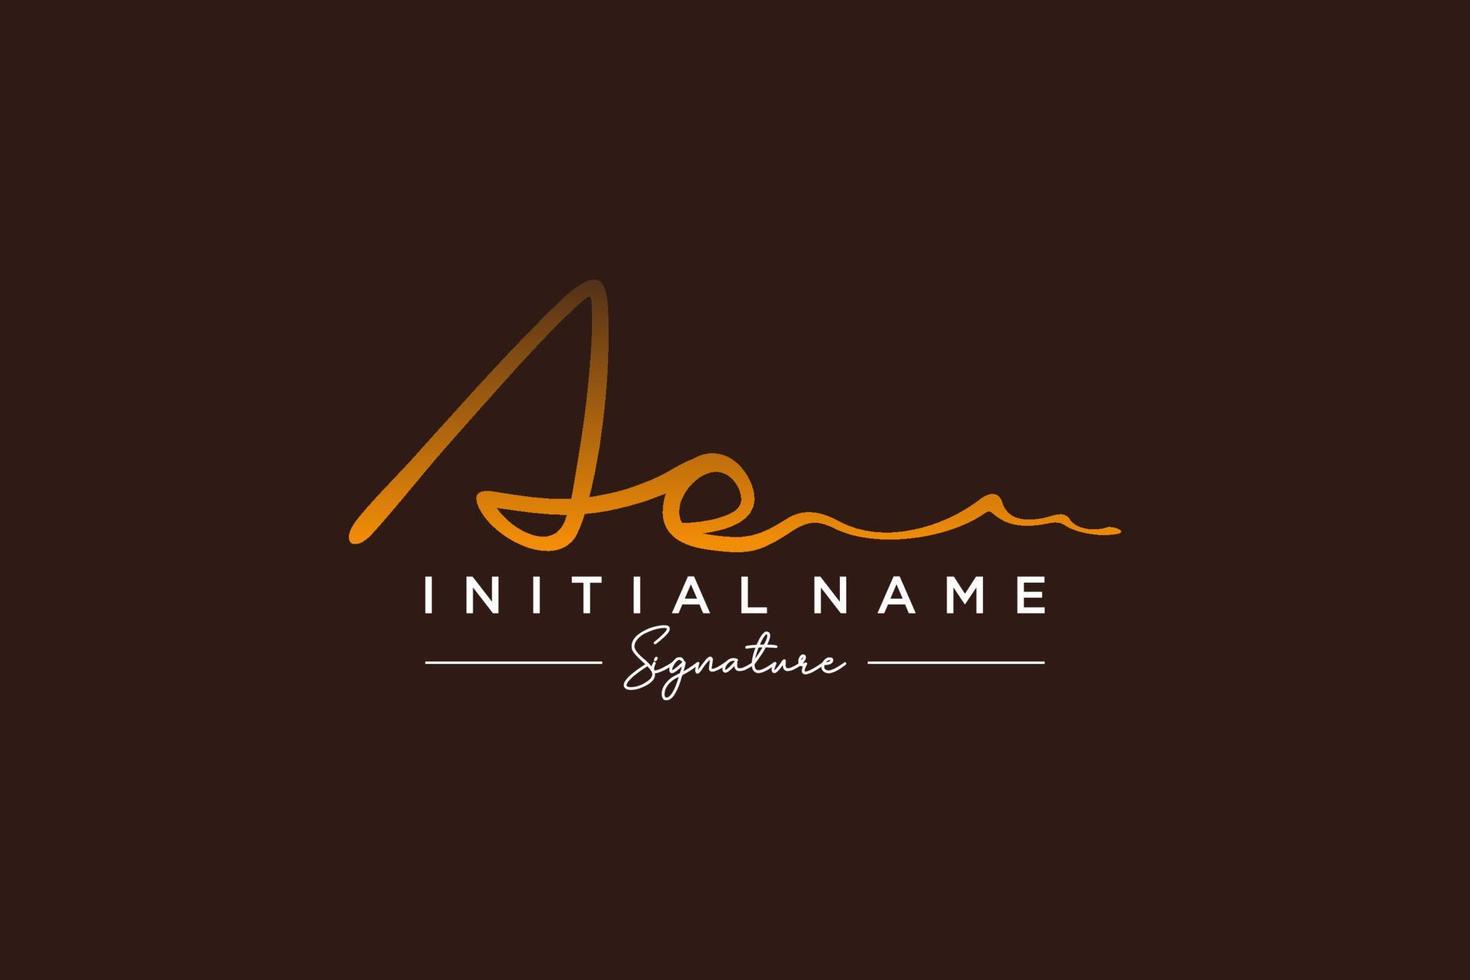 Initial AE signature logo template vector. Hand drawn Calligraphy lettering Vector illustration.